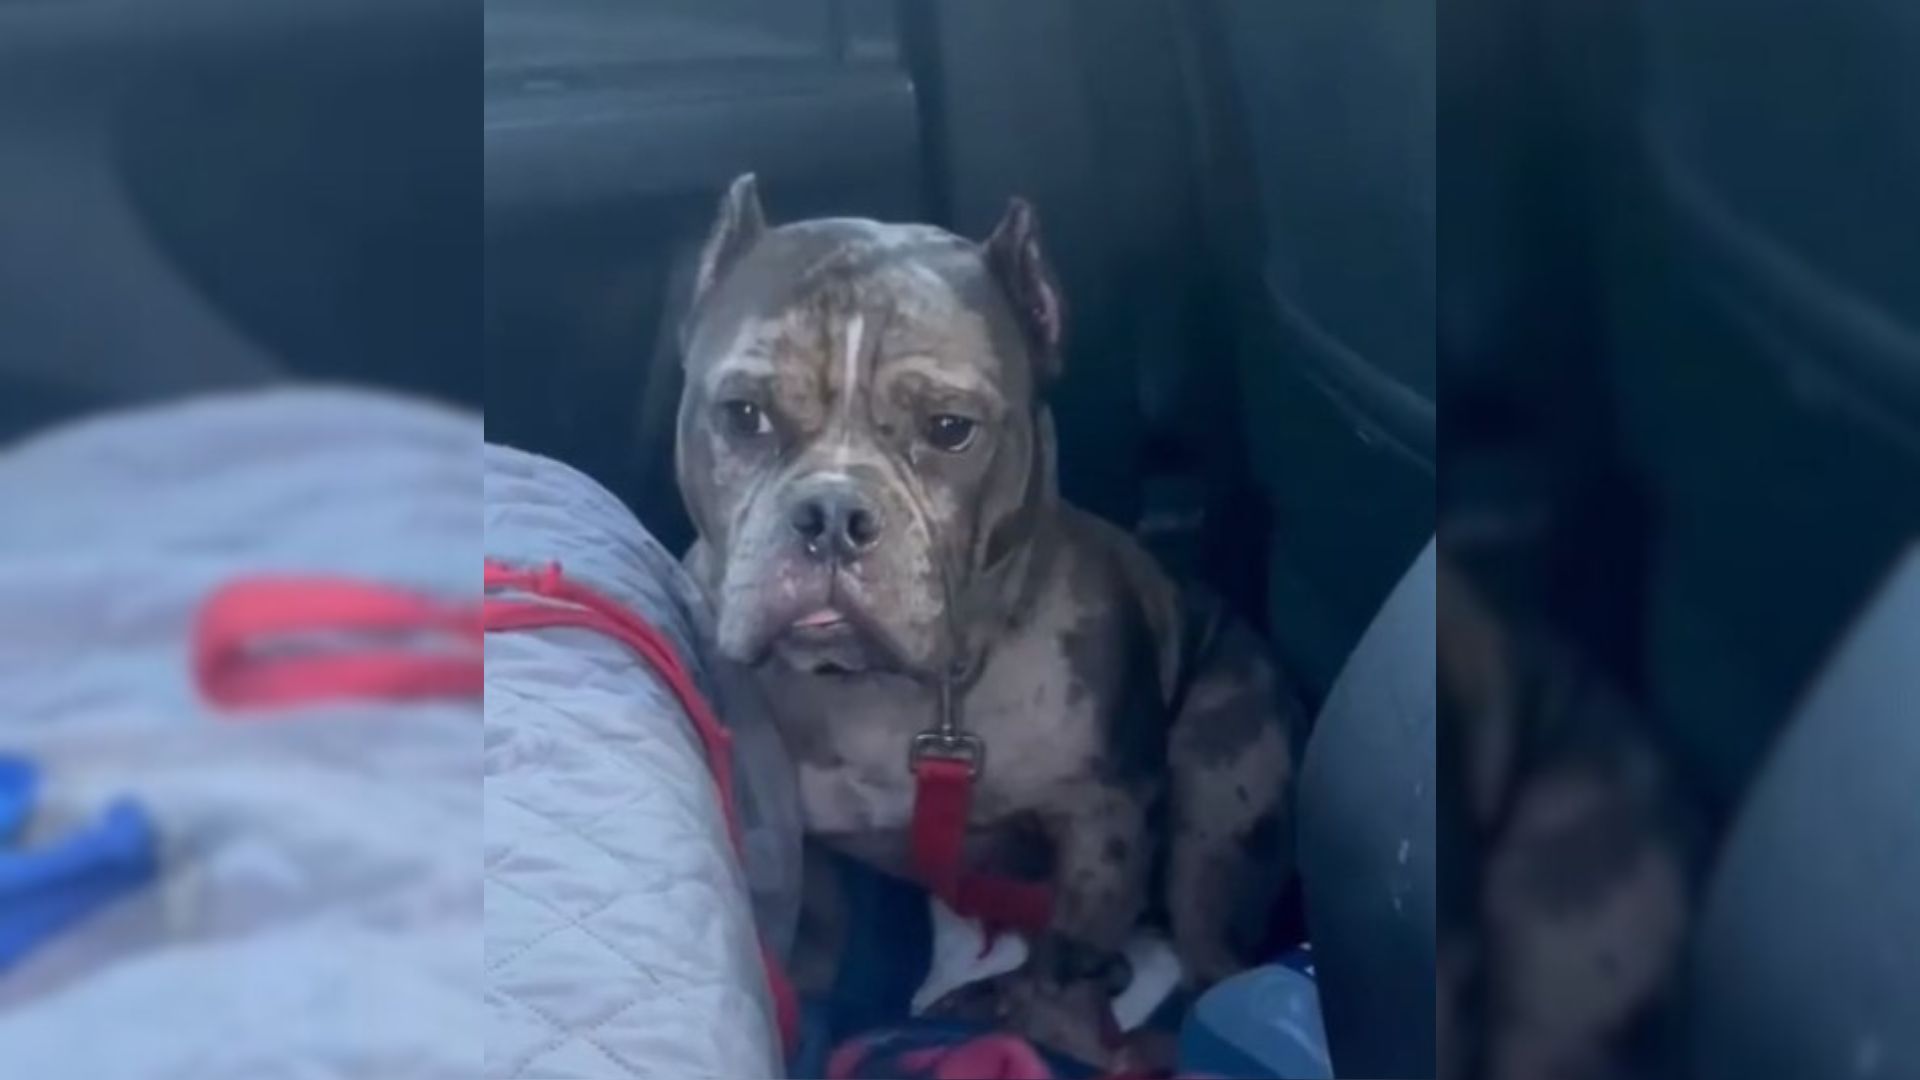 The Reason Behind This Heartbroken Dog Sticking To The Car Will Leave You In Tears